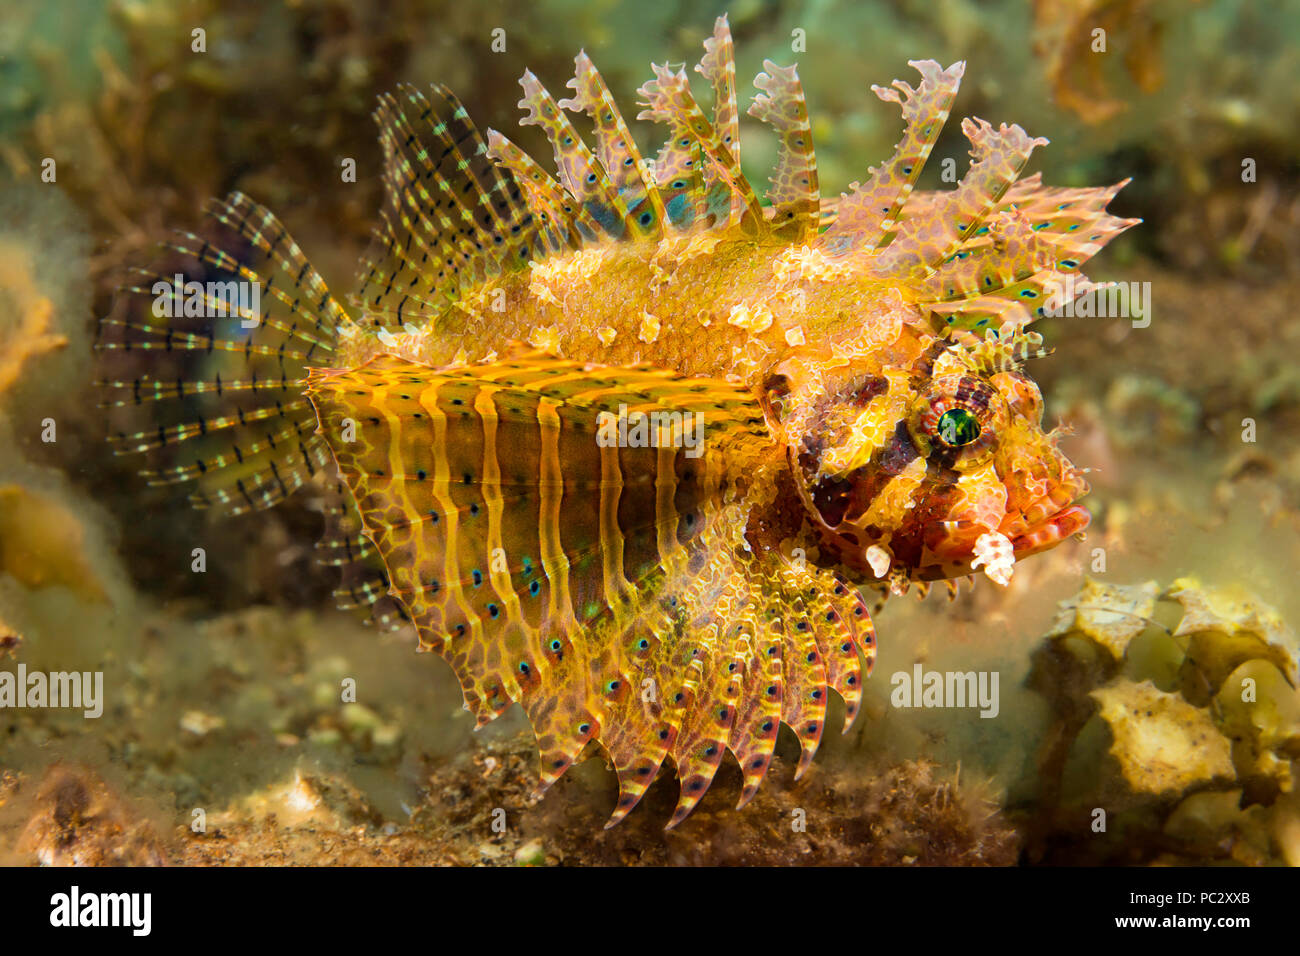 The dwarf lionfish, Dendrochirus brachypterus, is also known as the shortfin lionfish or shortfin turkeyfish. This species has many color variations.  Stock Photo